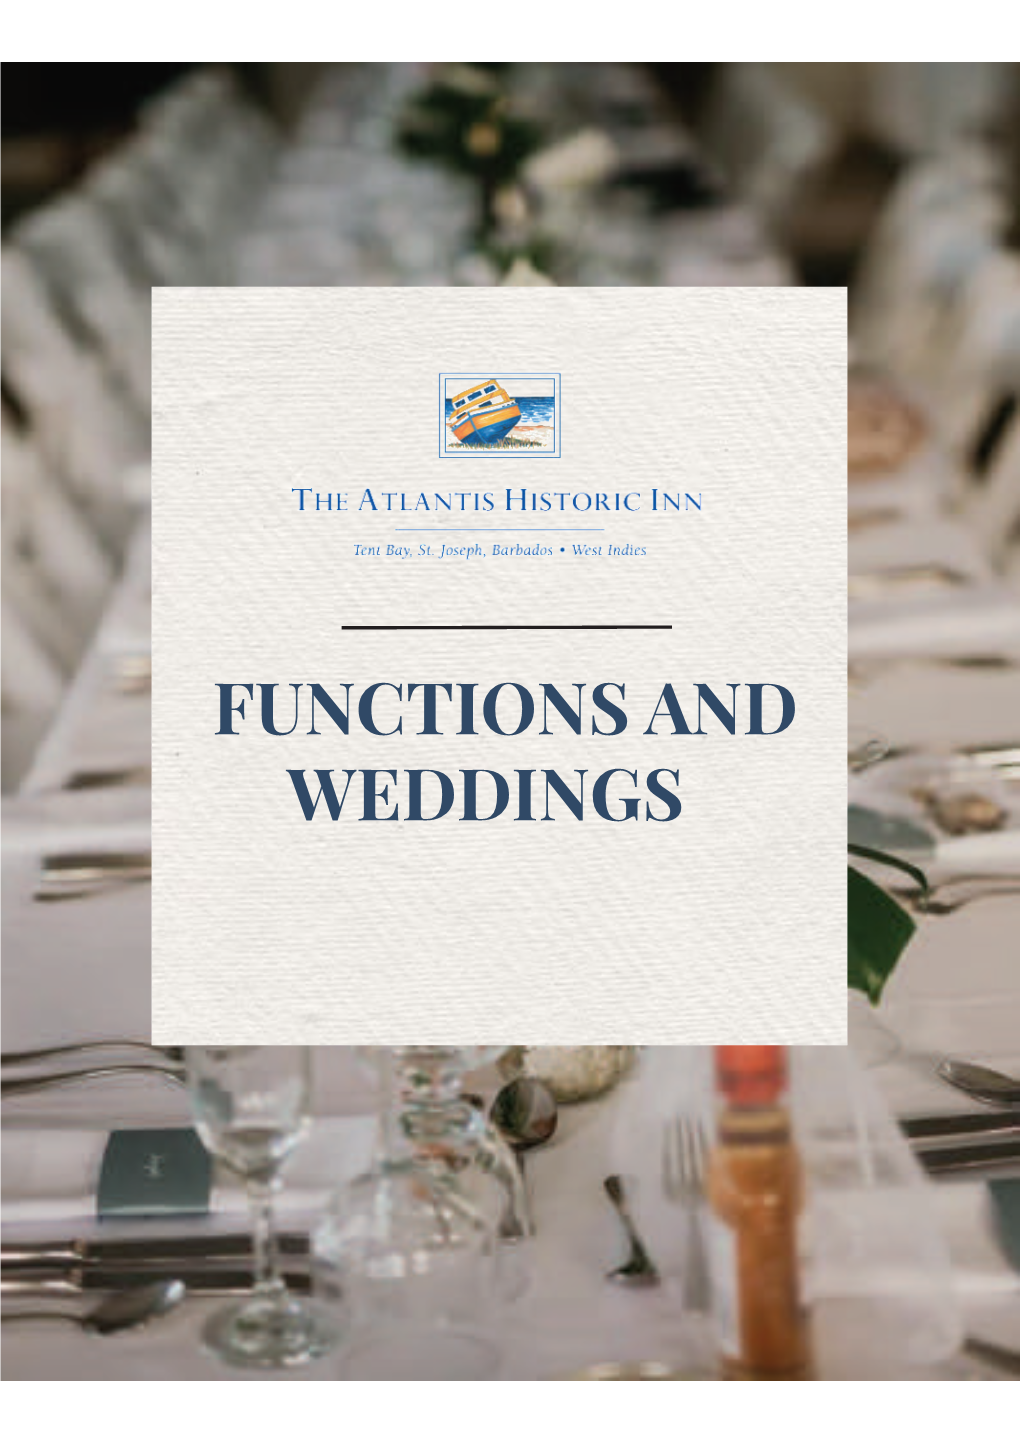 FUNCTIONS and WEDDINGS Welcome to the Atlantis Historic Inn